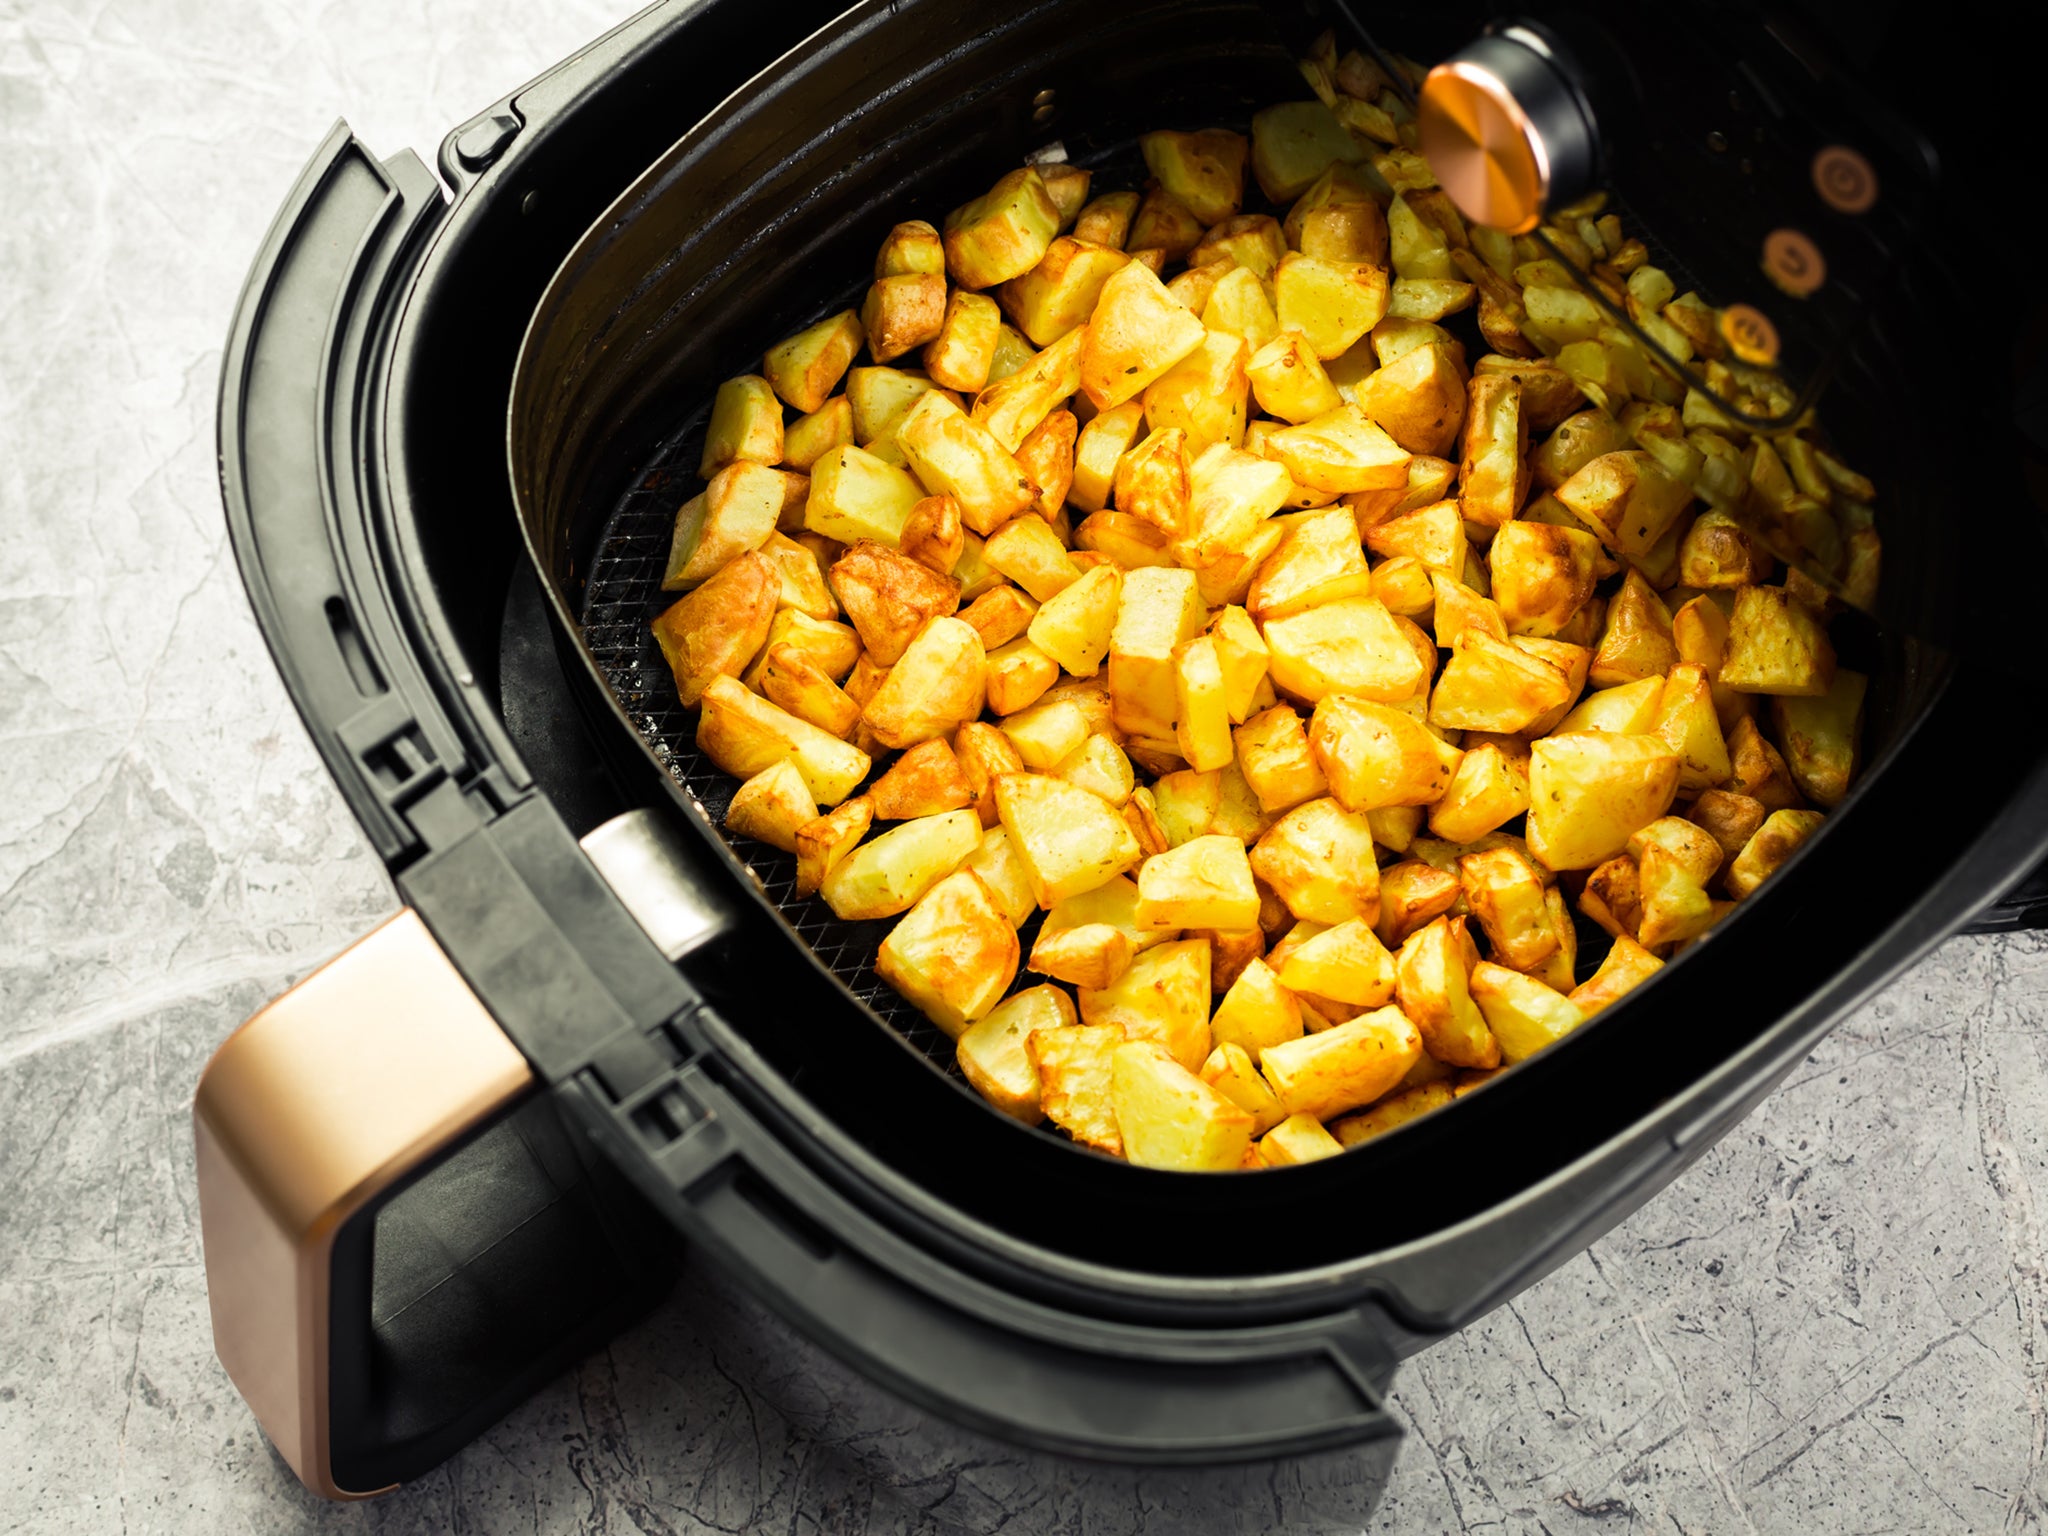 From drying to avoiding overcrowding, these tips will produce the perfect roast potato without ever switching on the oven